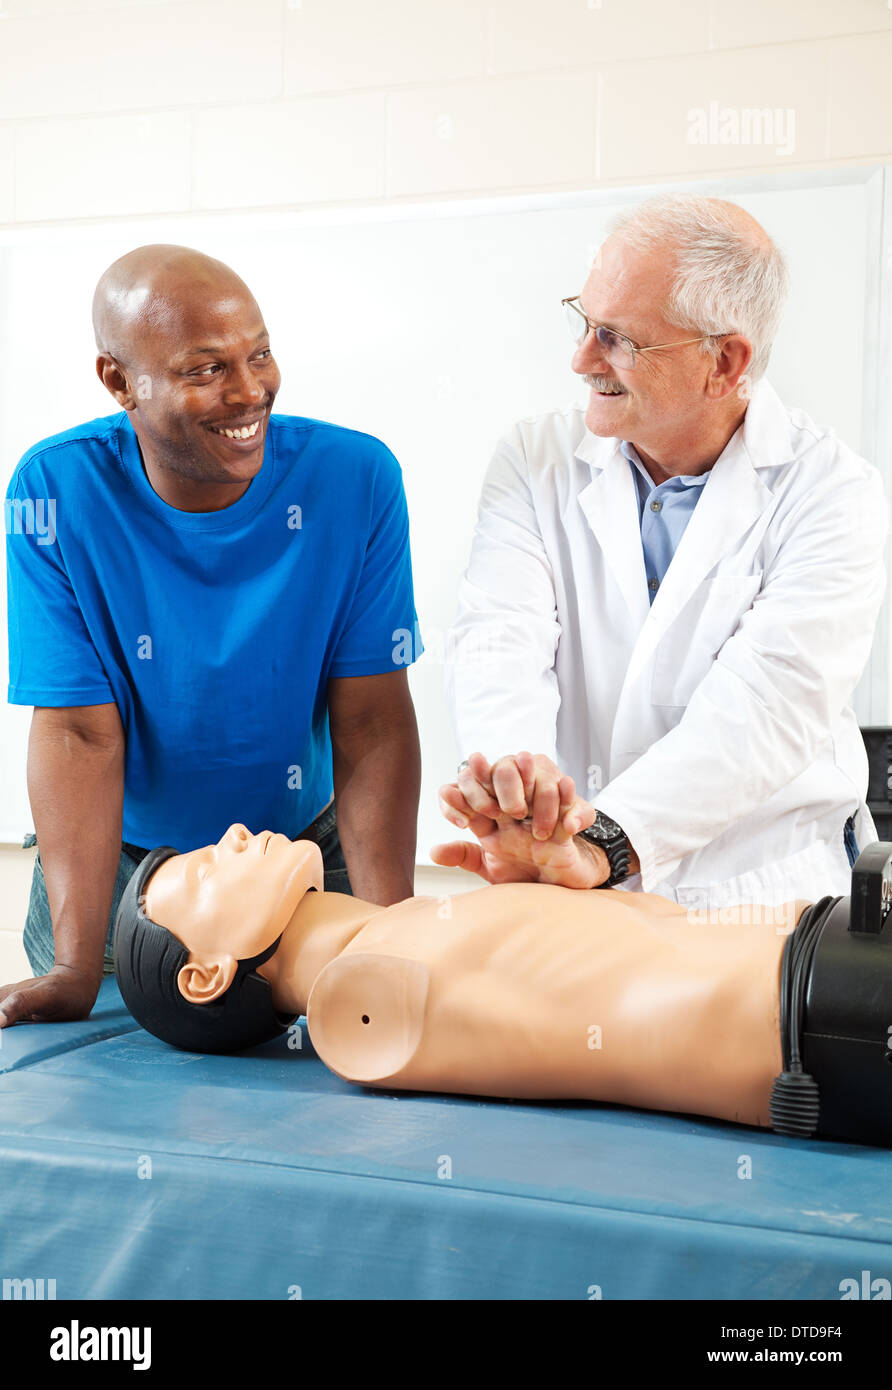 African-american adult student learning first aid CPR from a doctor. Stock Photo